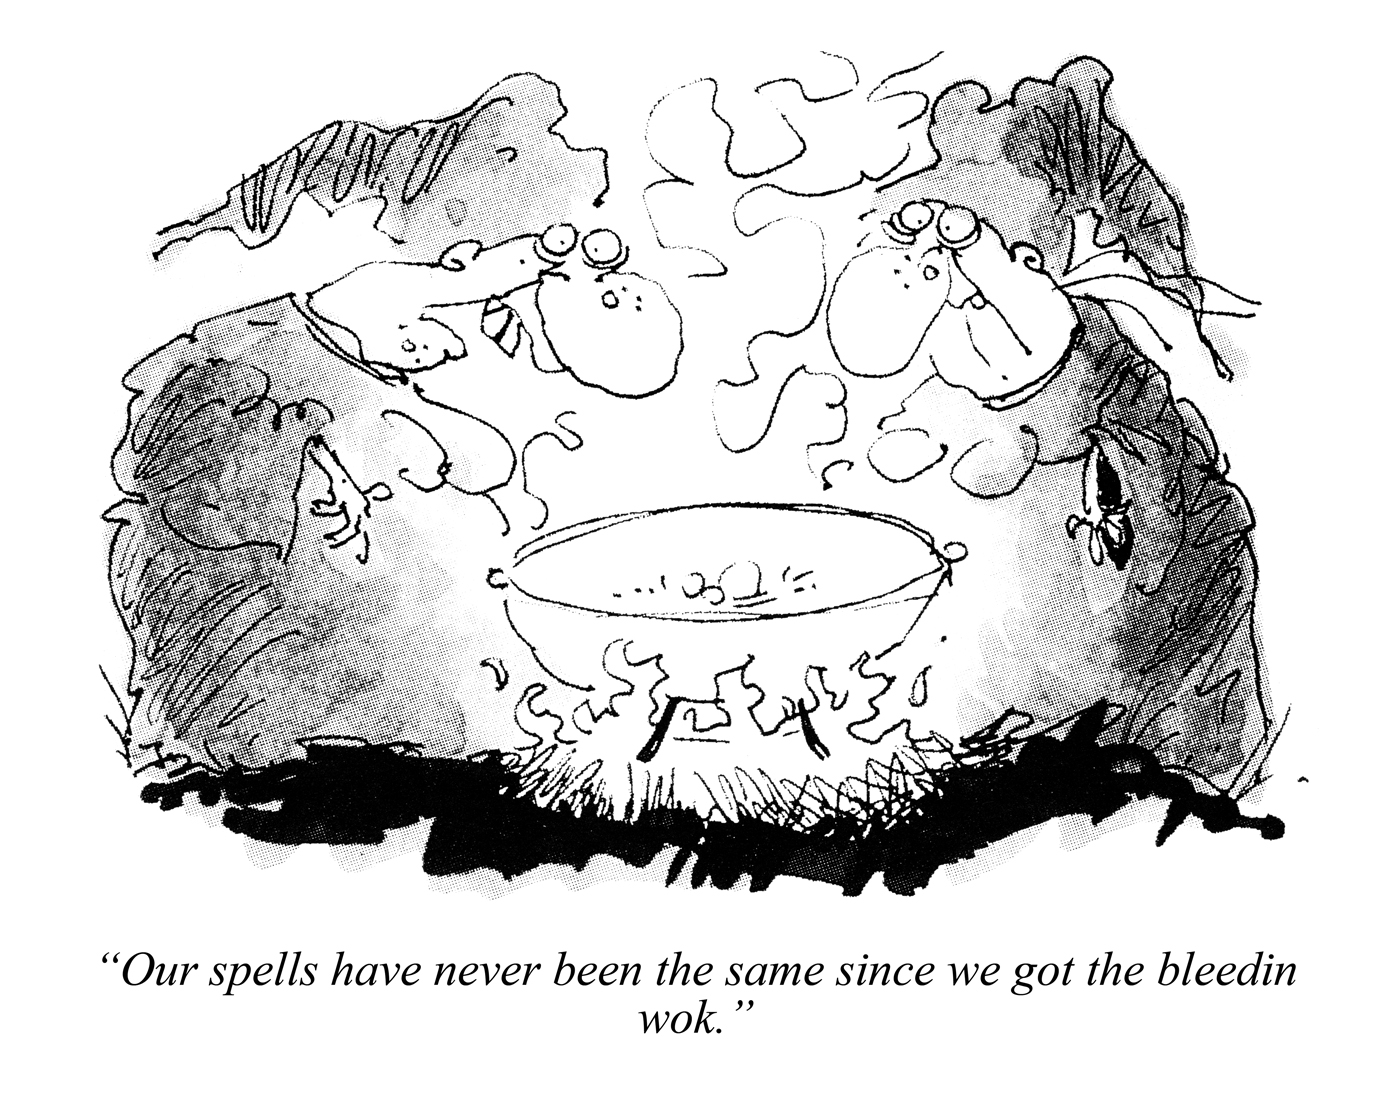 “Our spells have never been the same since we got the bleedin wok.” © Punch Ltd